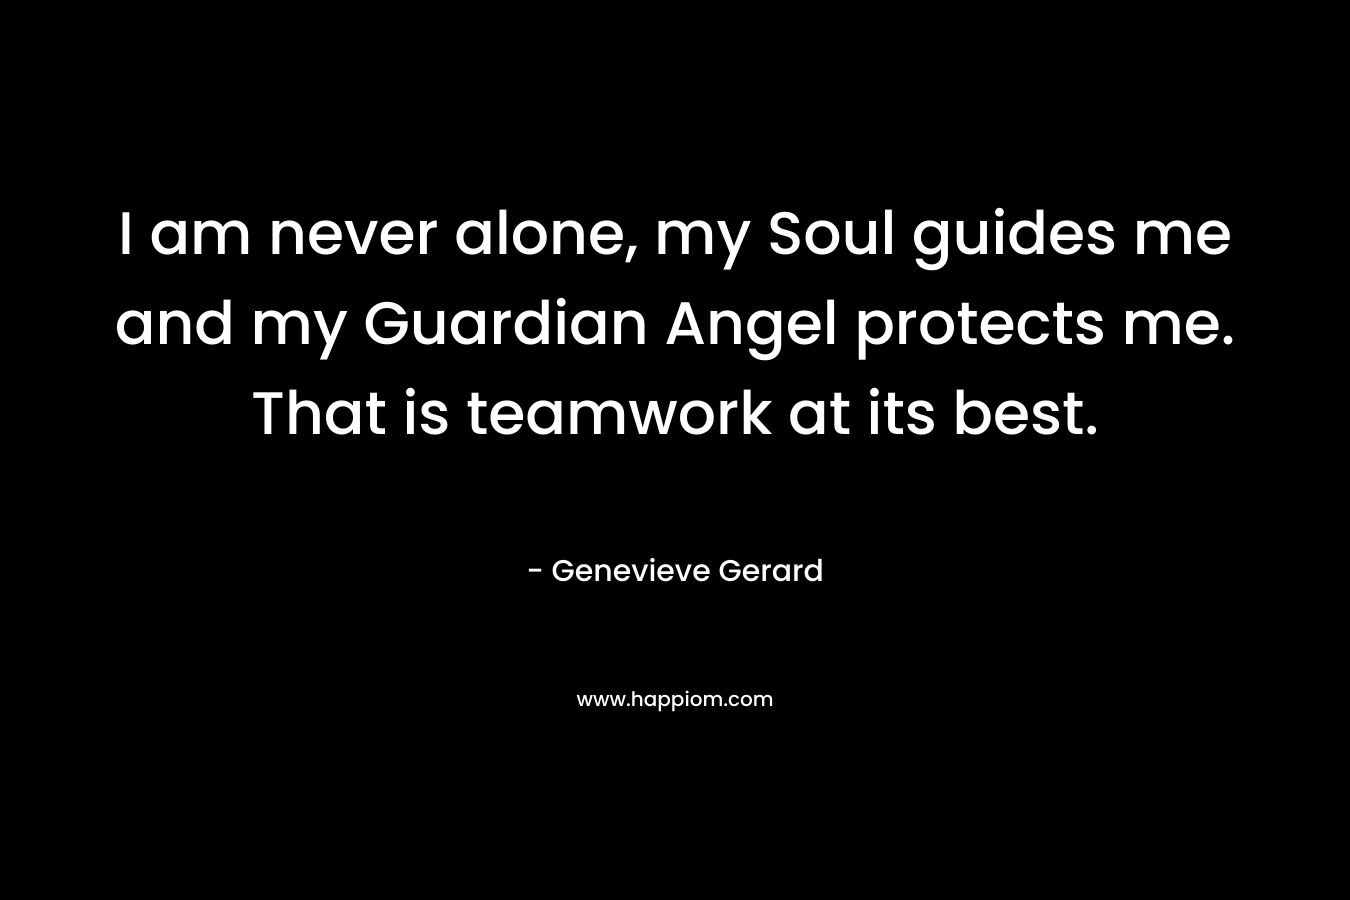 I am never alone, my Soul guides me and my Guardian Angel protects me. That is teamwork at its best. – Genevieve Gerard